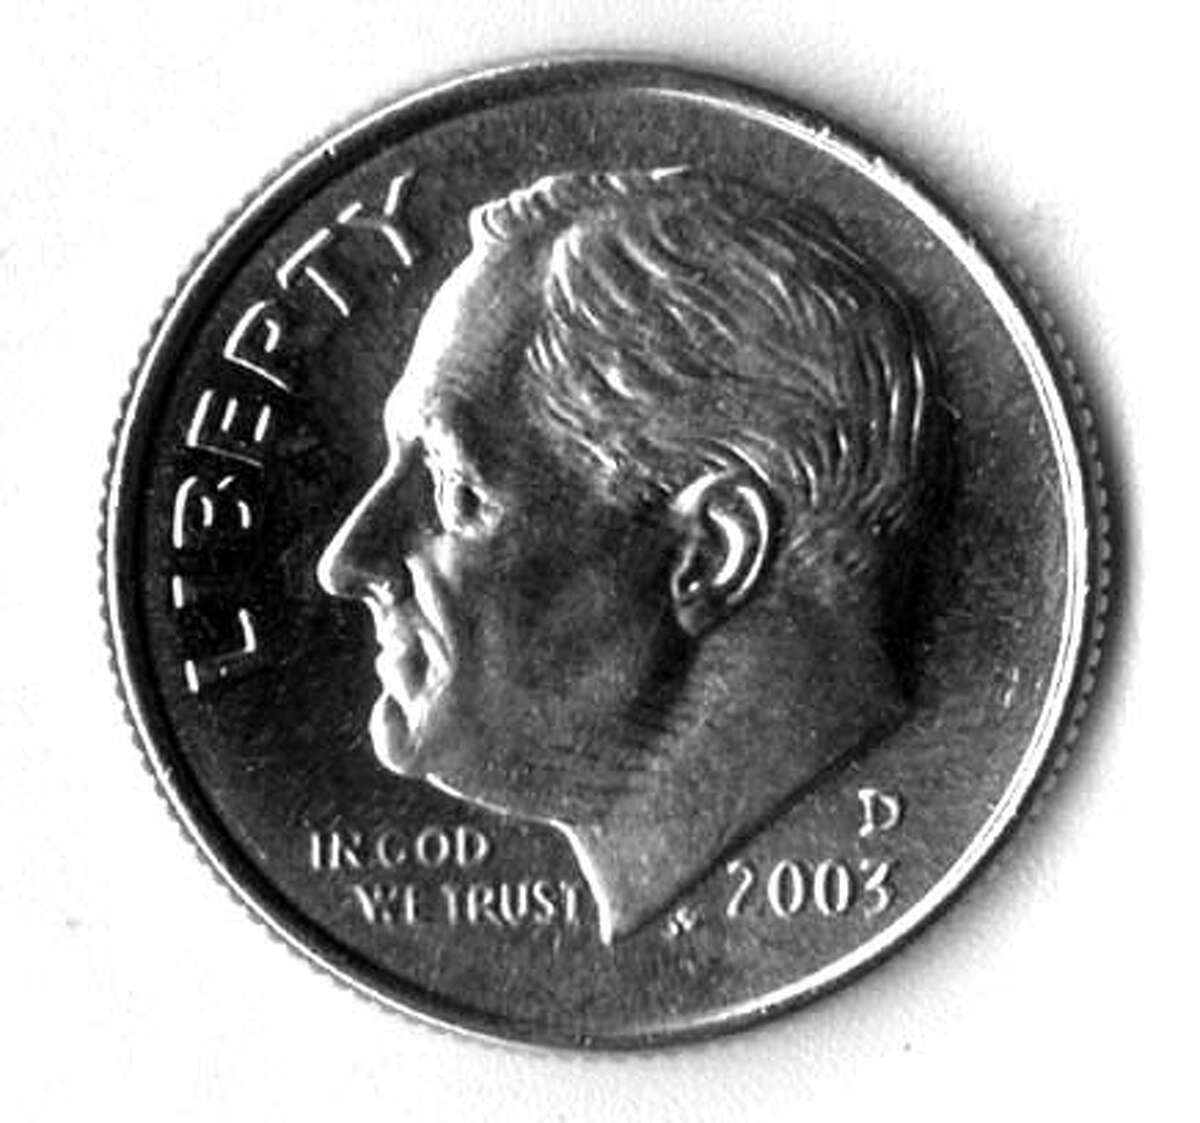 for DIME; this is a dime. ten cents. 1/10 of a dollar. FDR is on the dime.